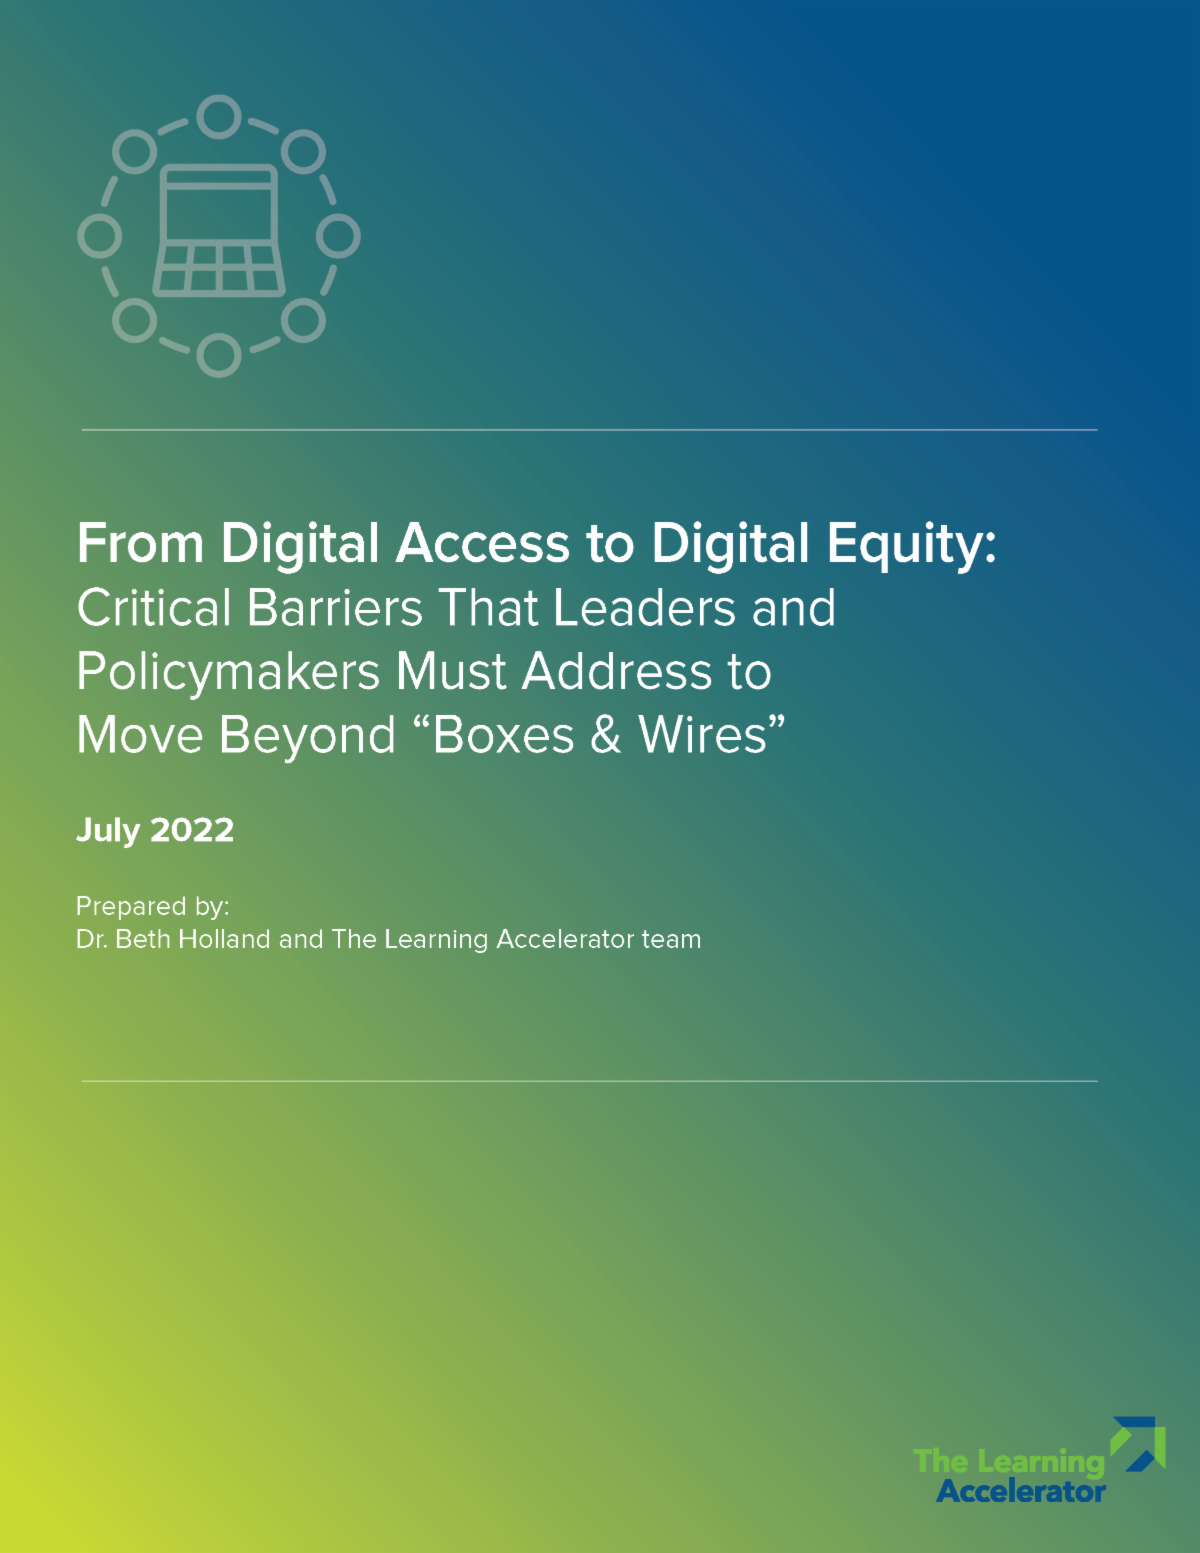 From Digital Access To digital equity Critical Barriers that leaders and policymakers must address to move beyond boxes and wires July 2022 Prepared By Dr Beth Holland and the Learning Accelerator Team